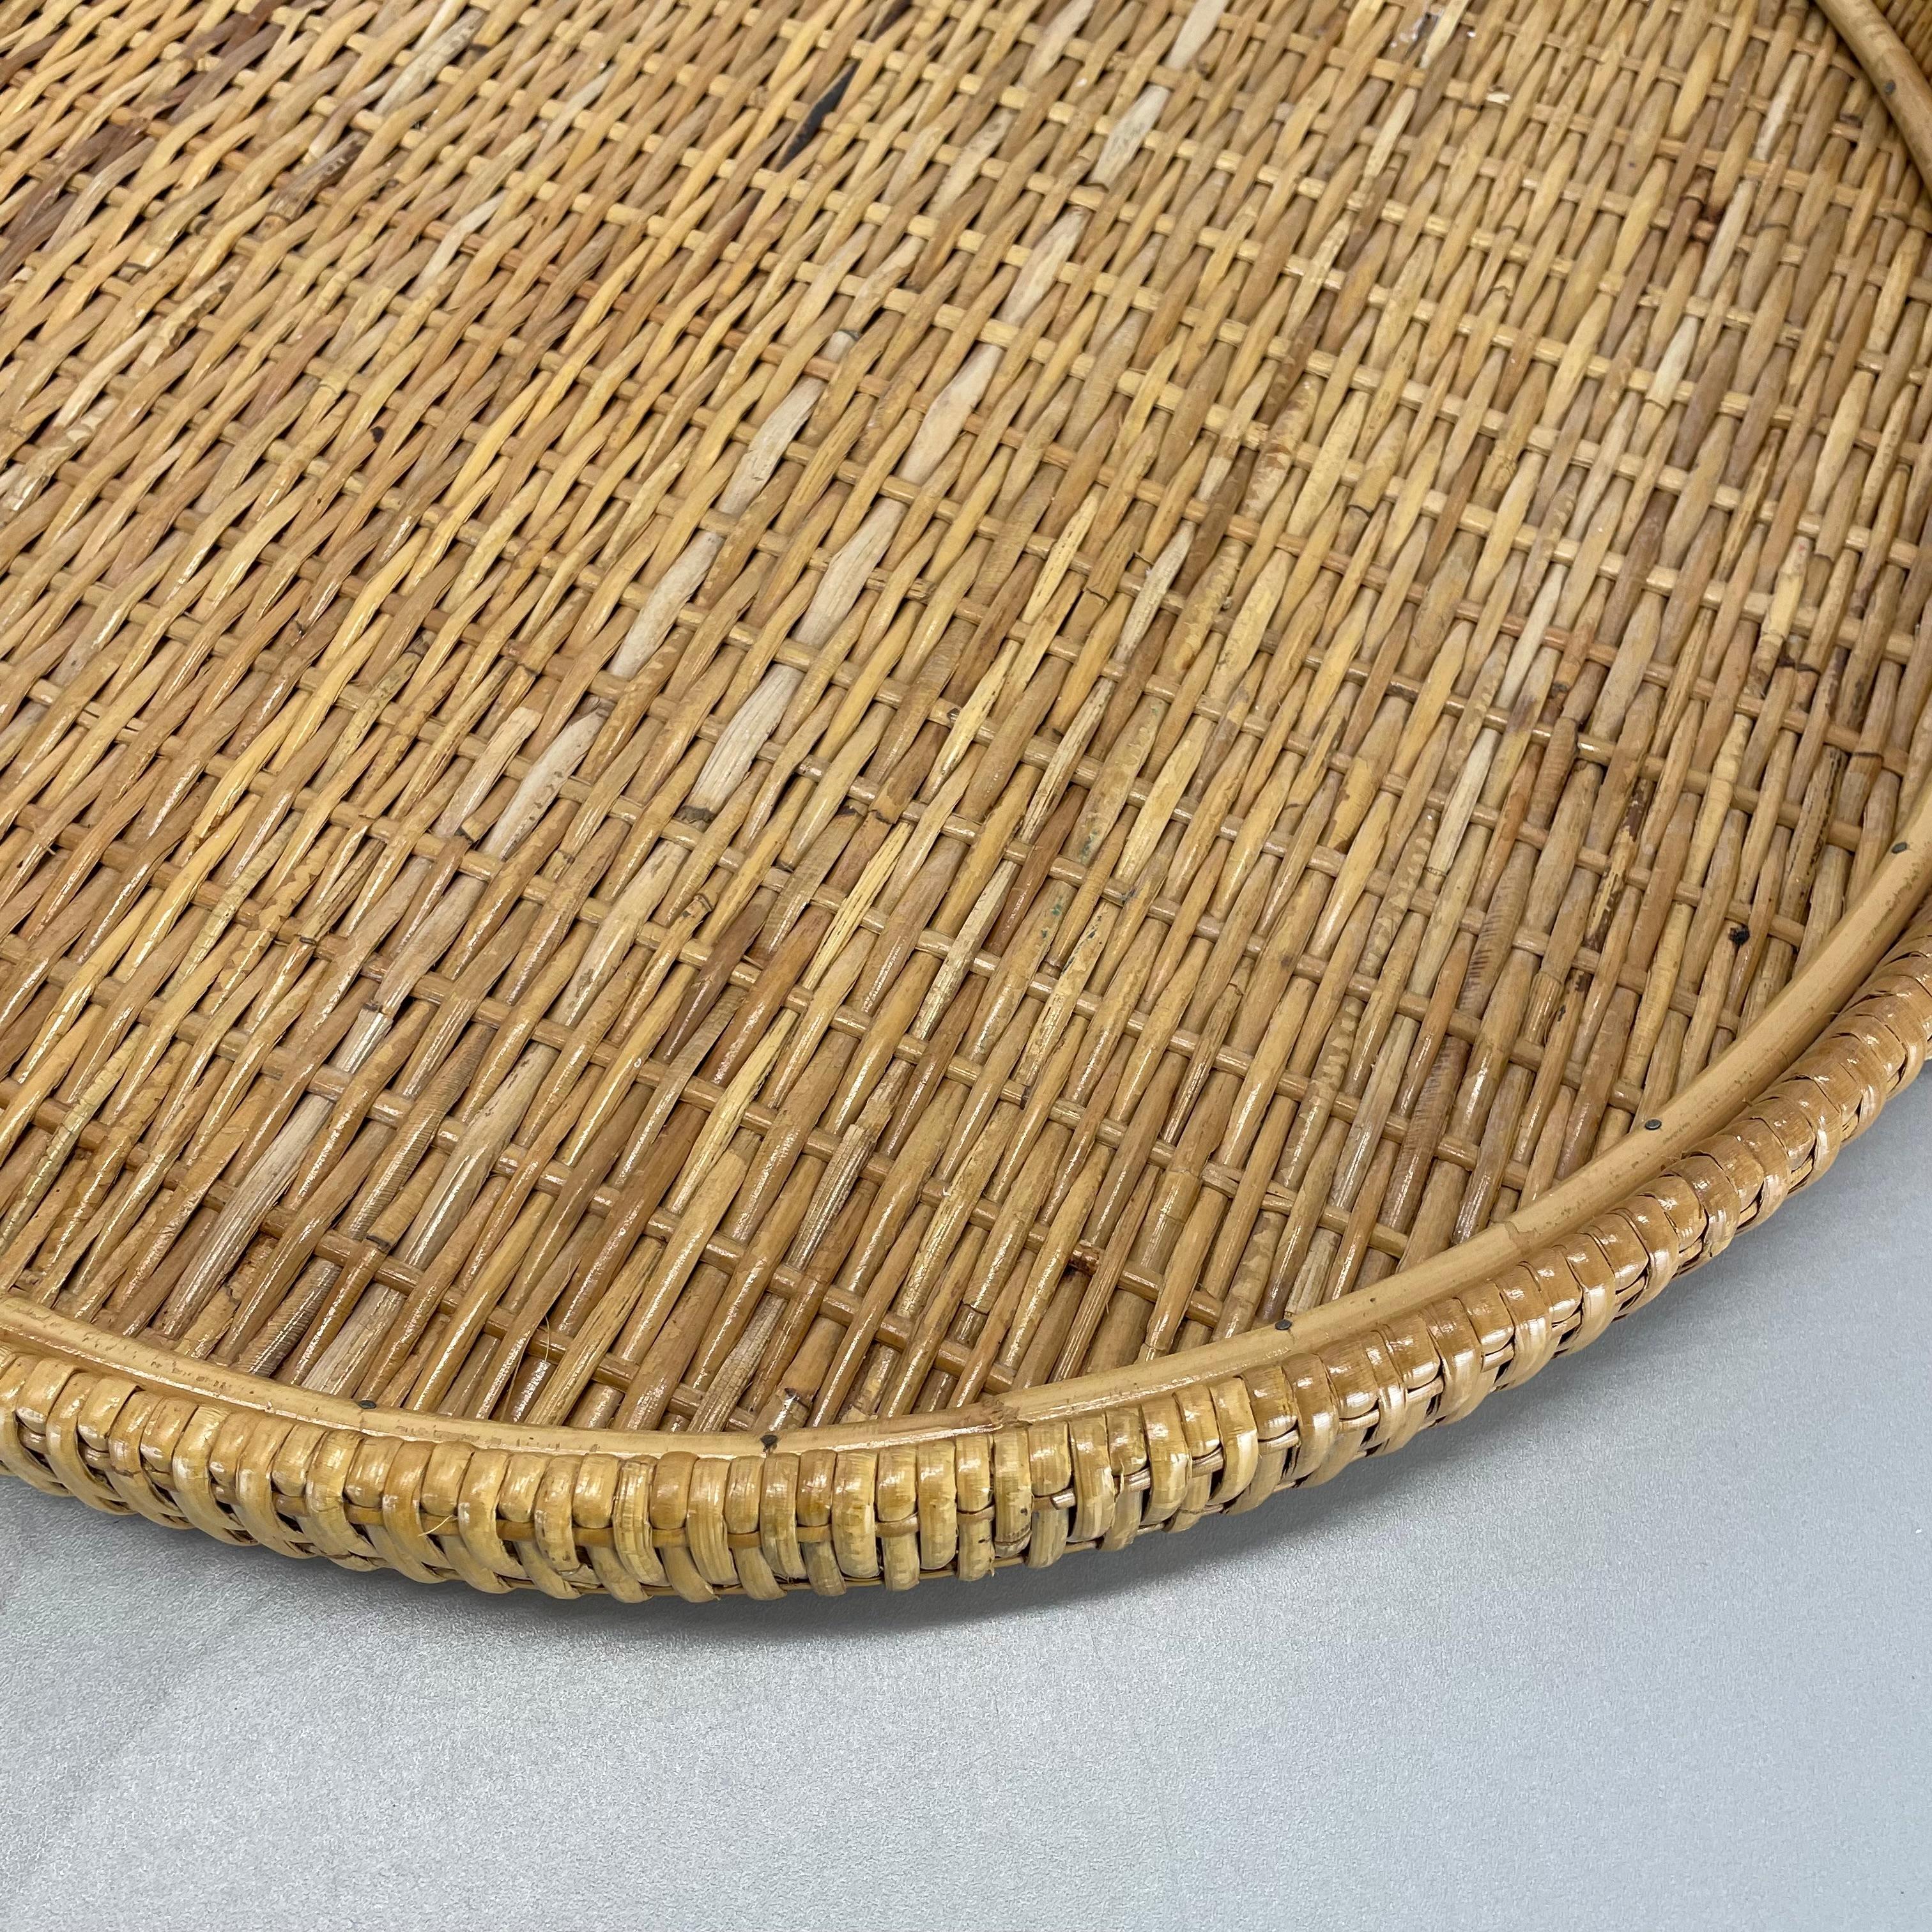 Large 50cm Rattan Rotin tray element in Gabriella Crespi Style, Italy, 1970s For Sale 5